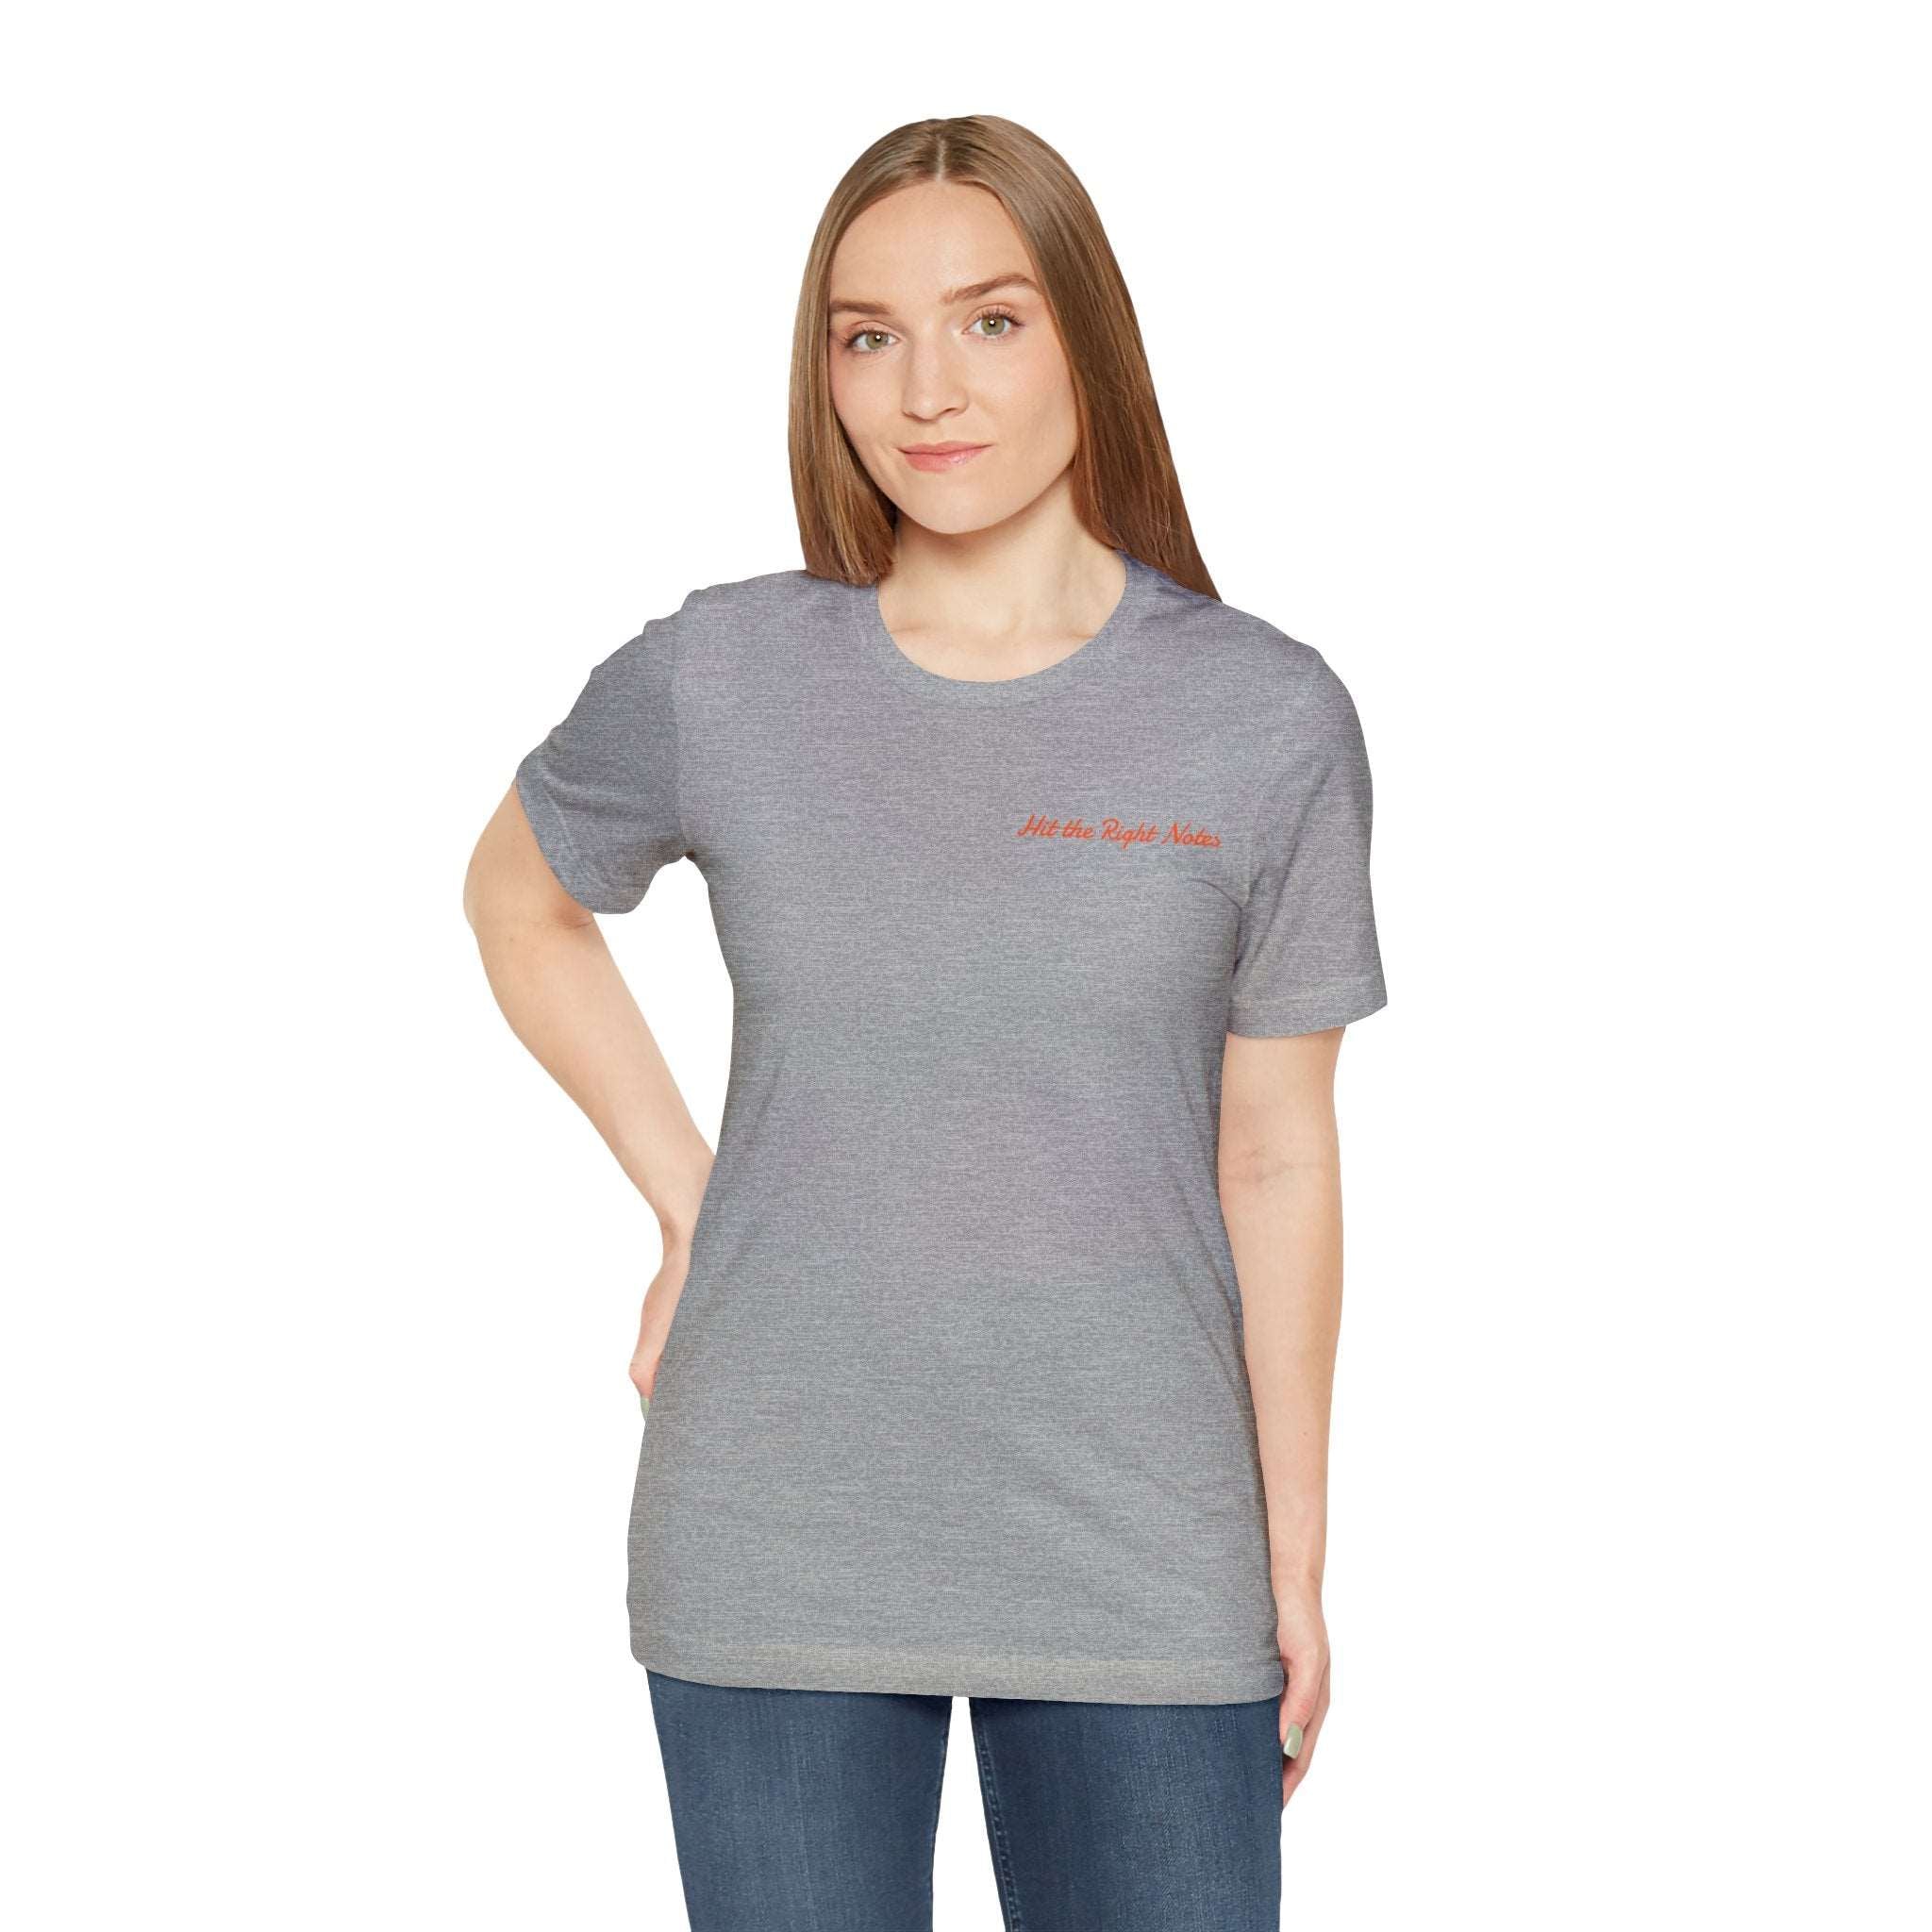 Hit the Right Notes Jersey Tee - Bella+Canvas 3001 Heather Mauve Classic Tee Comfortable Tee Cotton T-Shirt Graphic Tee JerseyTee Statement Shirt T-shirt Tee Unisex Apparel T-Shirt 5858681298715467779_2048_2f54181a-a6c5-4f9b-a776-abb32cf022b2 Printify